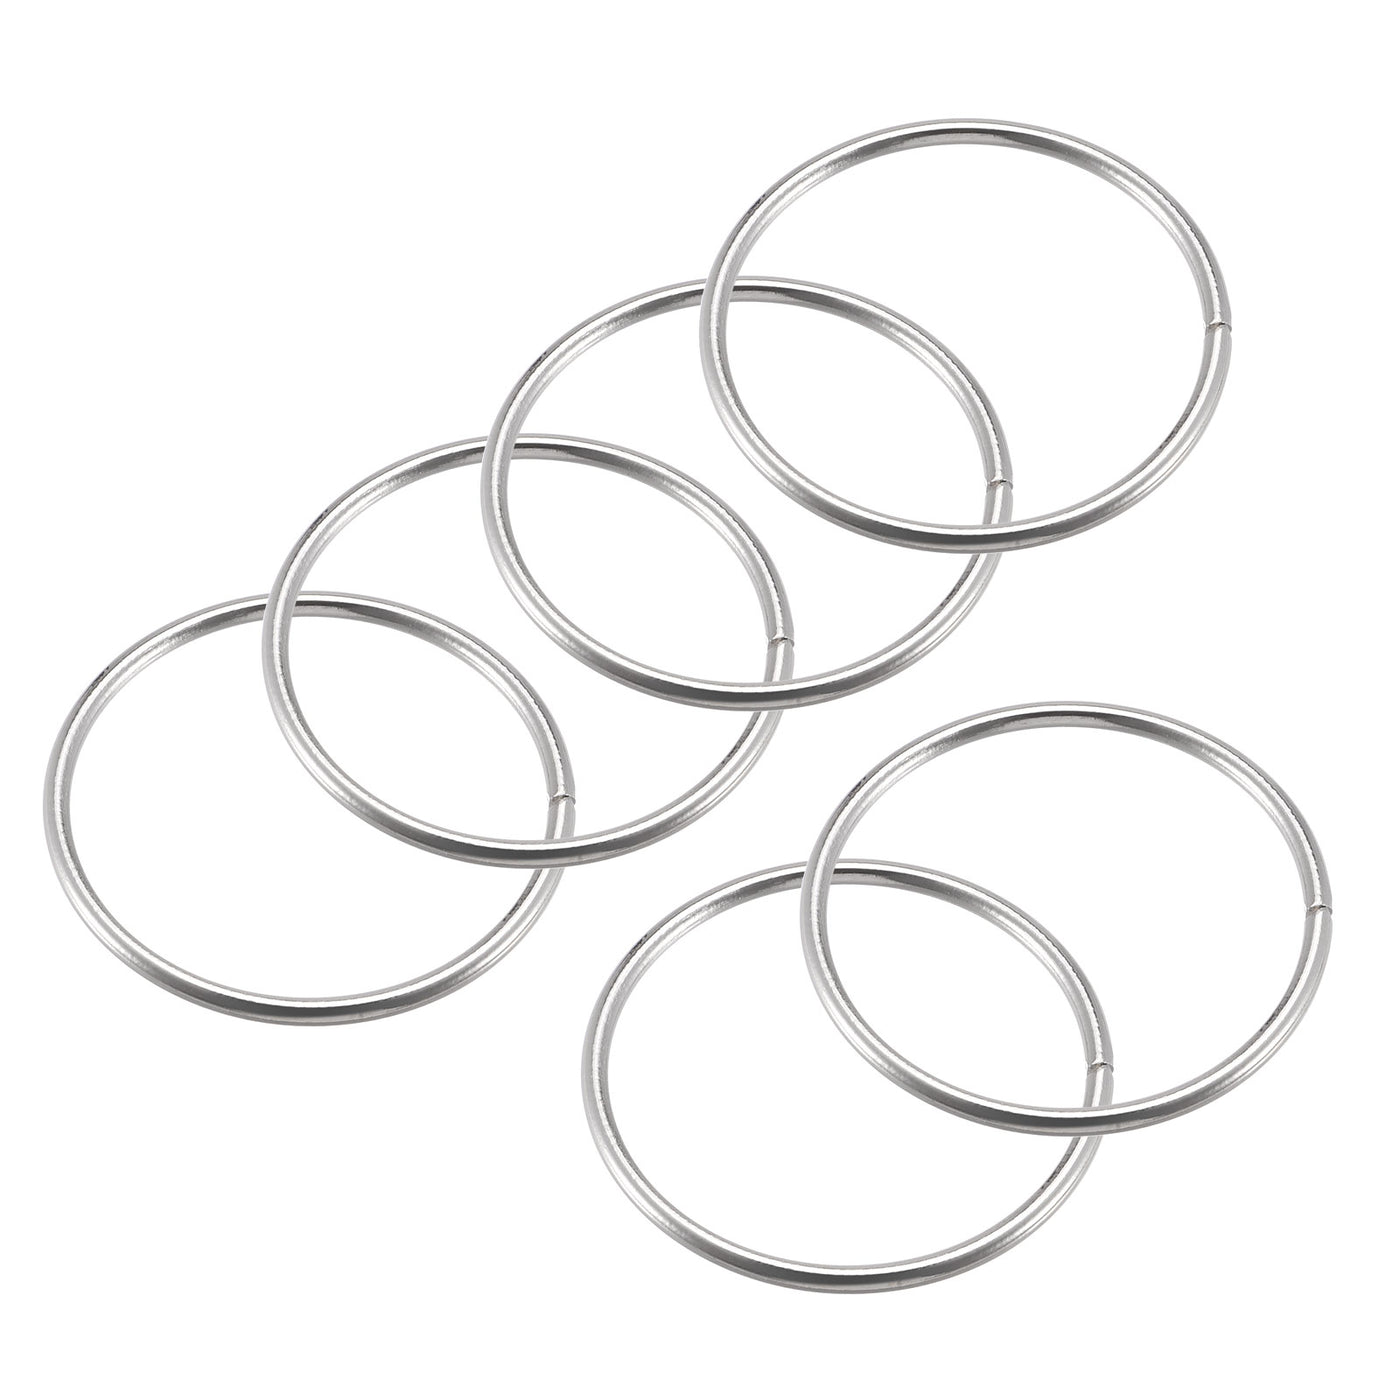 uxcell Uxcell 50mm(1.97") OD Metal O Ring Non-Welded Craft Hoops for DIY Silver Tone 25pcs